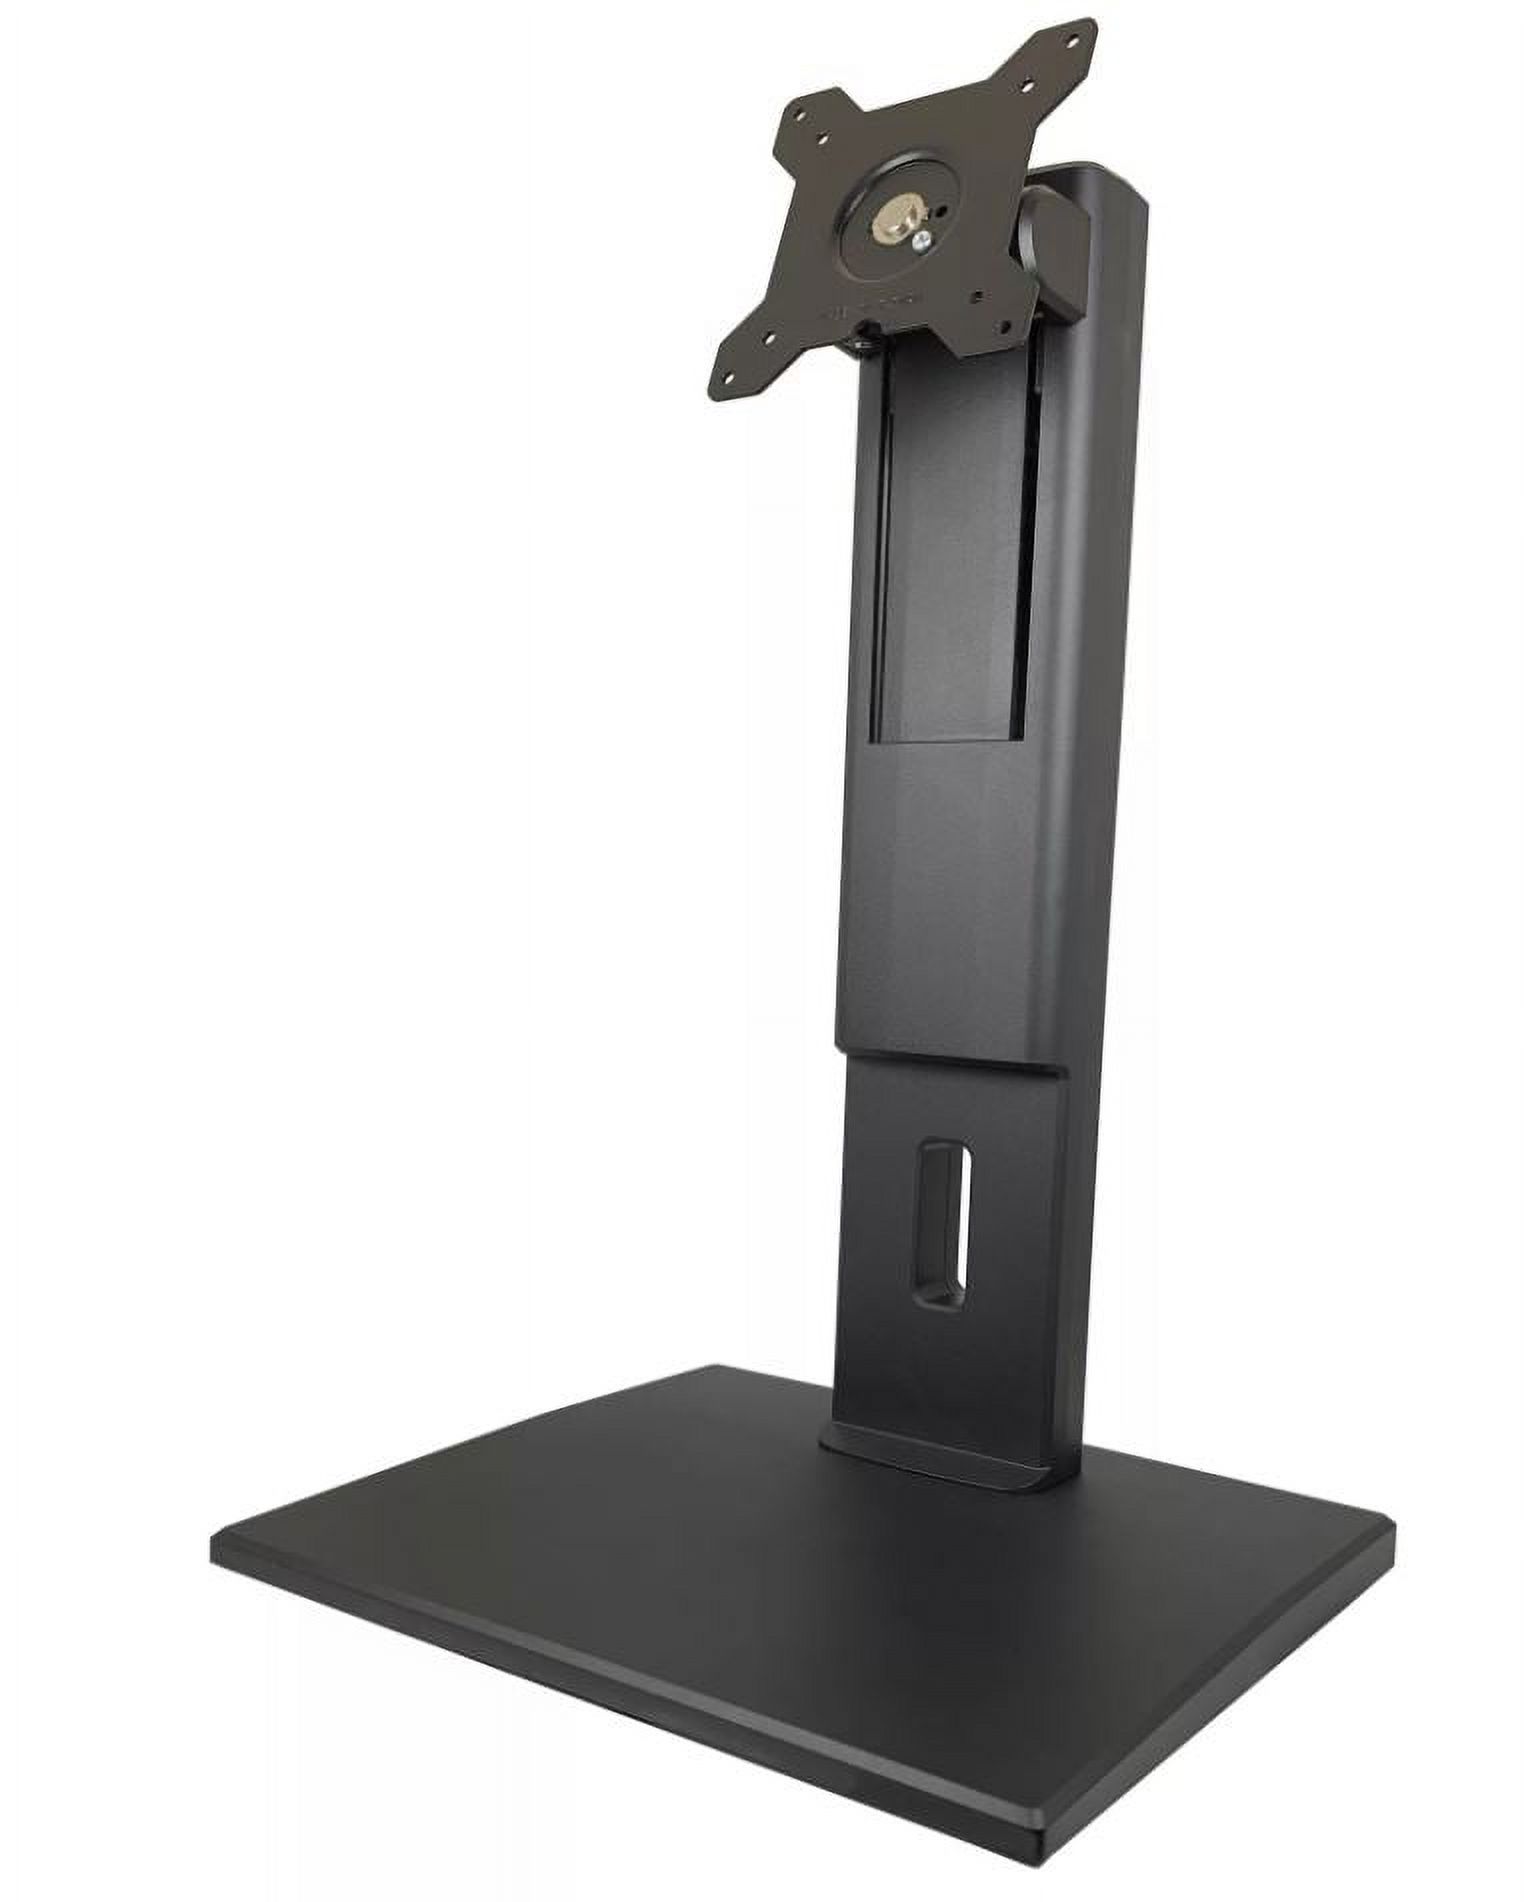 Amer Networks Single Flat Panel Monitor Stand With VESA Mounting Support, Black - image 1 of 2